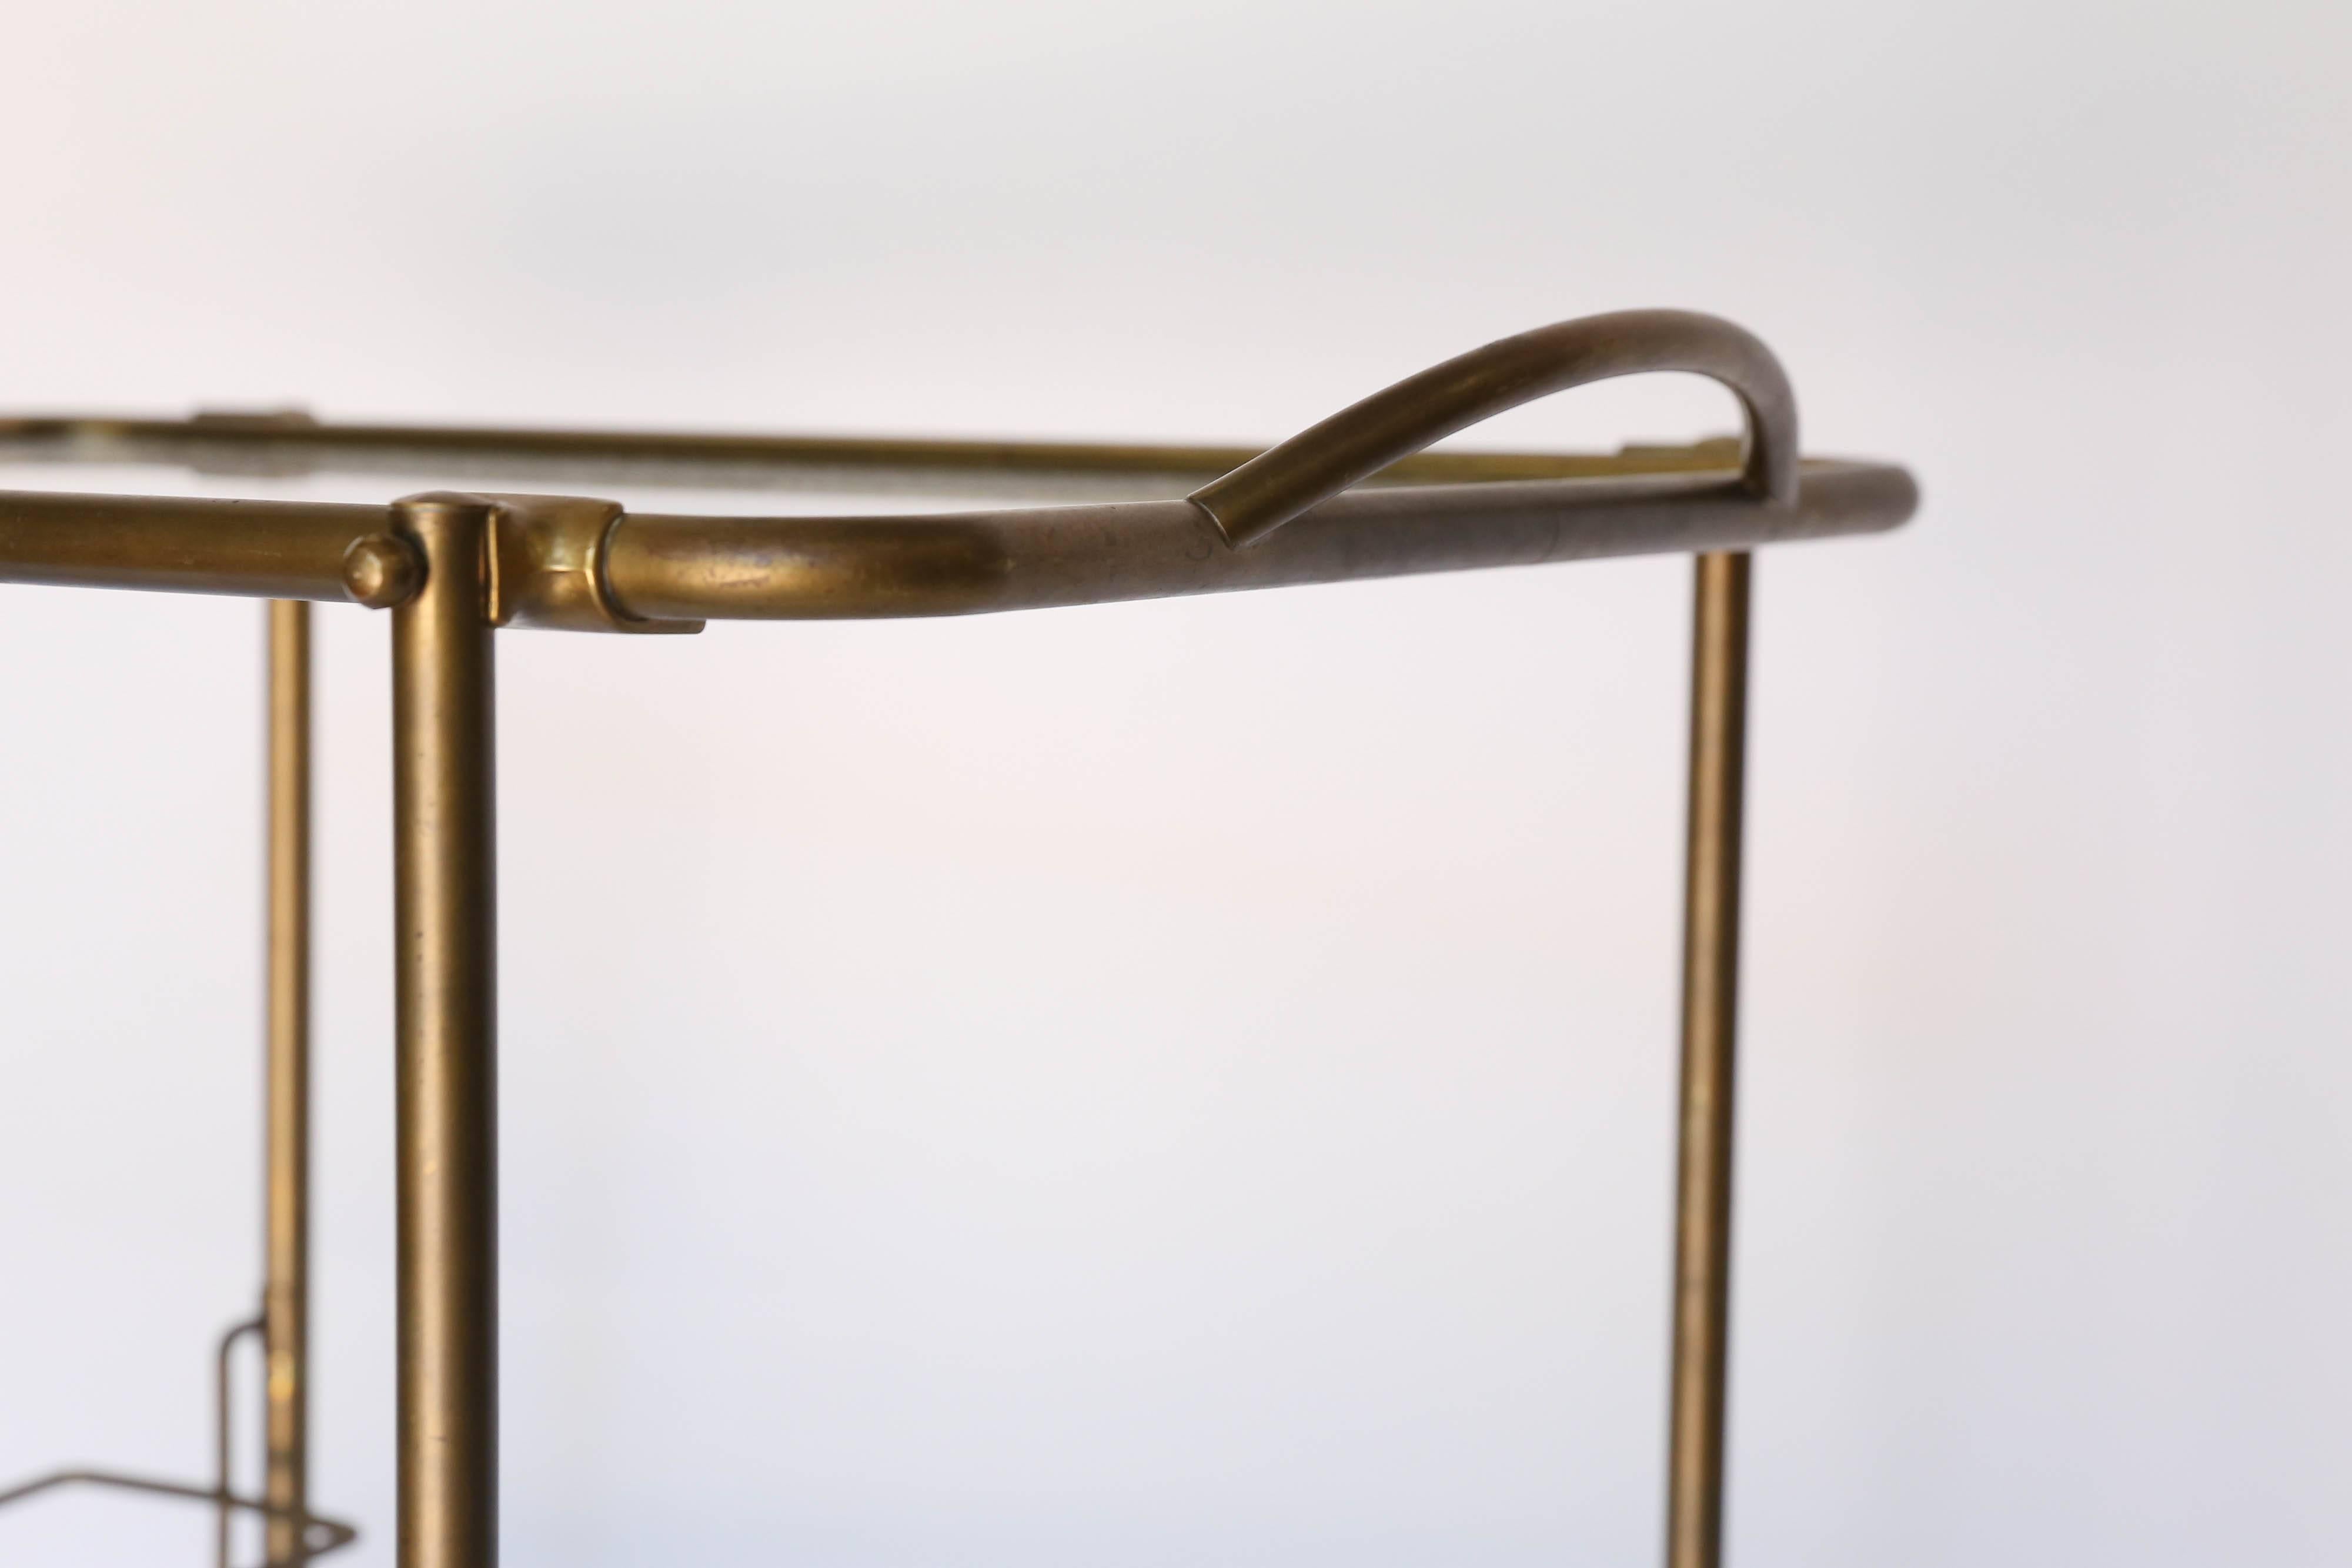 A French brass bar cart constructed with two levels of glass shelves with brass handle and wheels for easy transport. Display your vintage glassware, or serve your favorite cocktails and desserts.